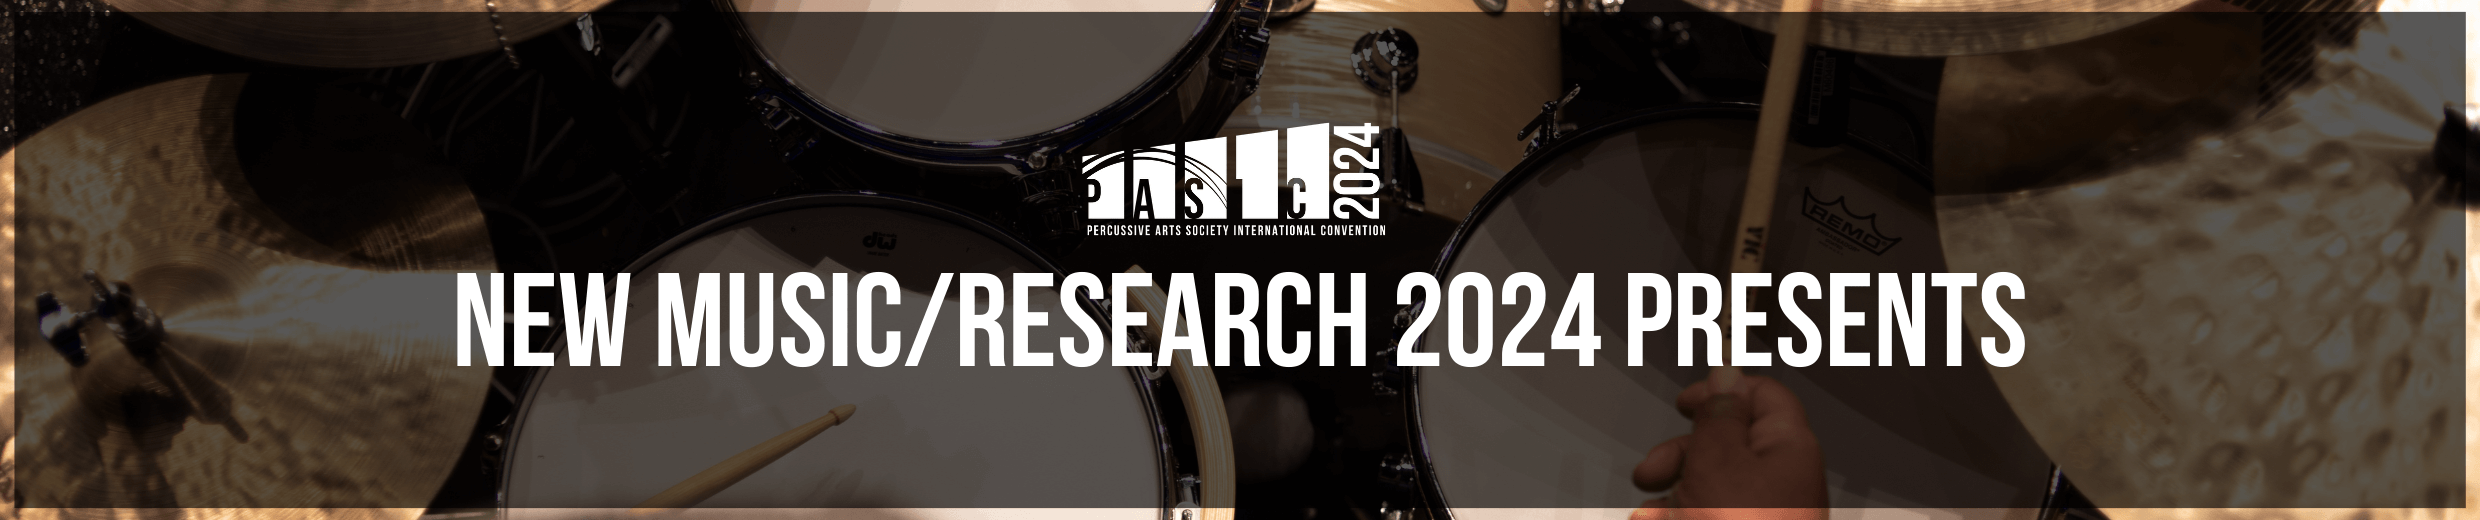 NEW MUSIC / RESEARCH 2024 PRESENTS